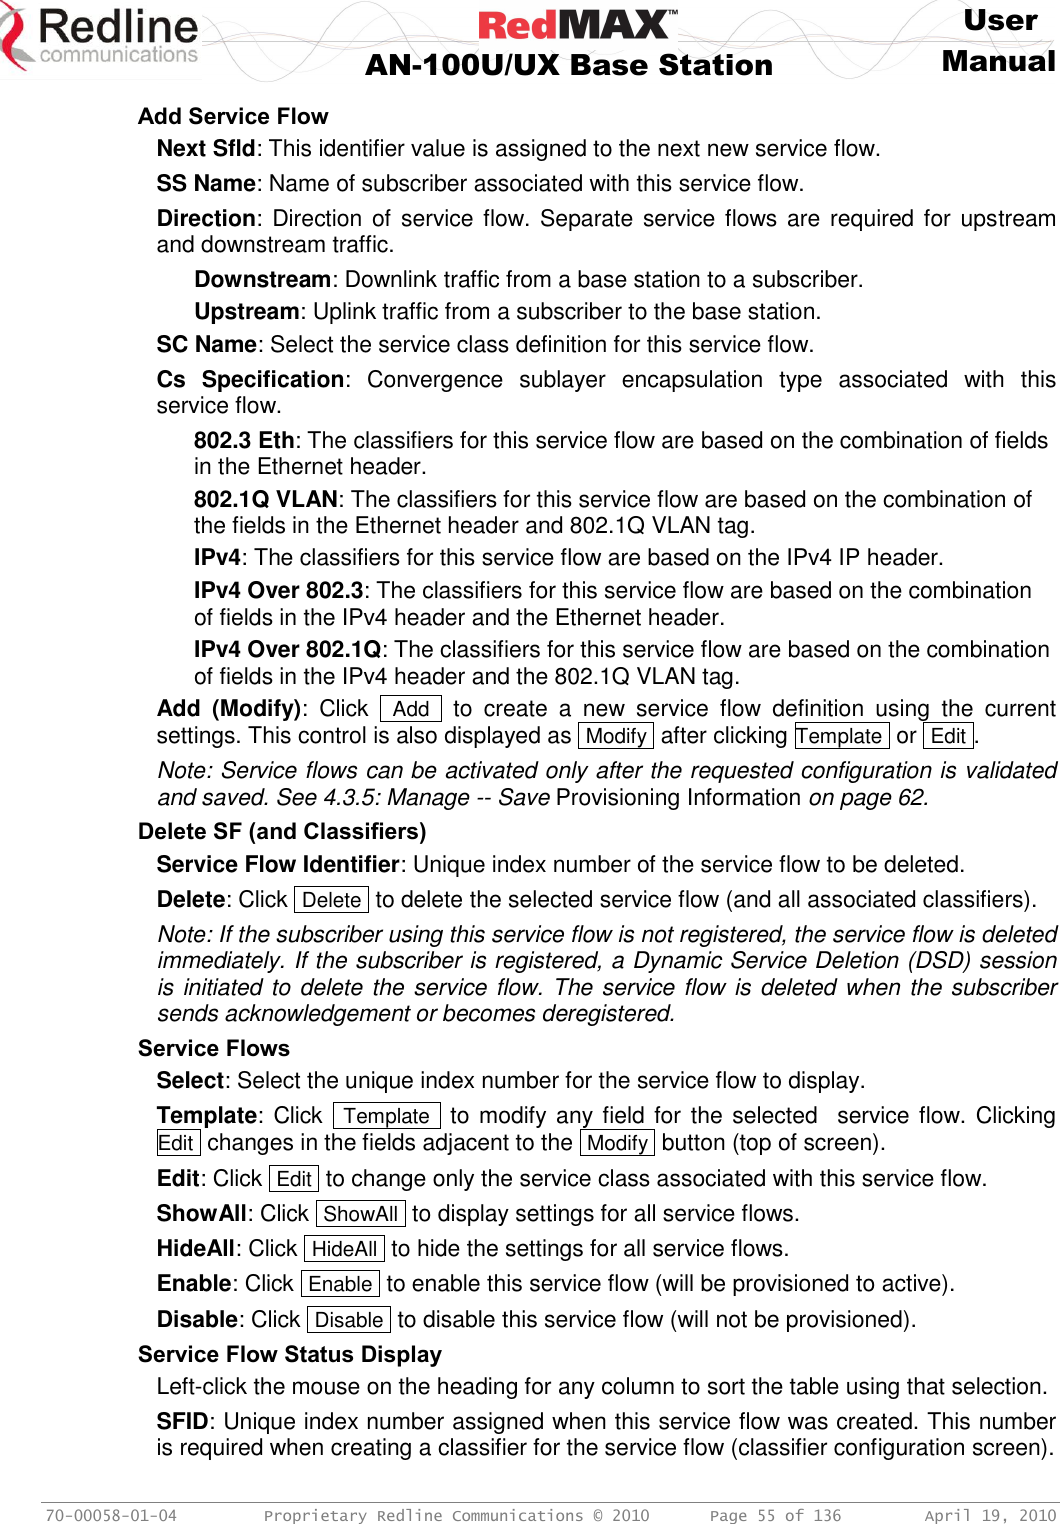     User  AN-100U/UX Base Station Manual   70-00058-01-04  Proprietary Redline Communications © 2010   Page 55 of 136  April 19, 2010 Add Service Flow Next Sfld: This identifier value is assigned to the next new service flow. SS Name: Name of subscriber associated with this service flow. Direction: Direction of service flow. Separate service flows are  required for upstream and downstream traffic. Downstream: Downlink traffic from a base station to a subscriber. Upstream: Uplink traffic from a subscriber to the base station. SC Name: Select the service class definition for this service flow. Cs  Specification:  Convergence  sublayer  encapsulation  type  associated  with  this service flow. 802.3 Eth: The classifiers for this service flow are based on the combination of fields in the Ethernet header. 802.1Q VLAN: The classifiers for this service flow are based on the combination of the fields in the Ethernet header and 802.1Q VLAN tag. IPv4: The classifiers for this service flow are based on the IPv4 IP header. IPv4 Over 802.3: The classifiers for this service flow are based on the combination of fields in the IPv4 header and the Ethernet header. IPv4 Over 802.1Q: The classifiers for this service flow are based on the combination of fields in the IPv4 header and the 802.1Q VLAN tag. Add  (Modify):  Click   Add   to  create  a  new  service  flow  definition  using  the  current settings. This control is also displayed as  Modify  after clicking Template  or  Edit . Note: Service flows can be activated only after the requested configuration is validated and saved. See 4.3.5: Manage -- Save Provisioning Information on page 62. Delete SF (and Classifiers) Service Flow Identifier: Unique index number of the service flow to be deleted. Delete: Click  Delete  to delete the selected service flow (and all associated classifiers). Note: If the subscriber using this service flow is not registered, the service flow is deleted immediately. If the subscriber is registered, a Dynamic Service Deletion (DSD) session is initiated to delete the service flow. The service flow is deleted when the subscriber sends acknowledgement or becomes deregistered. Service Flows Select: Select the unique index number for the service flow to display. Template: Click   Template  to modify any field for the selected   service flow. Clicking  Edit  changes in the fields adjacent to the  Modify  button (top of screen). Edit: Click  Edit  to change only the service class associated with this service flow. ShowAll: Click  ShowAll  to display settings for all service flows. HideAll: Click  HideAll  to hide the settings for all service flows. Enable: Click  Enable  to enable this service flow (will be provisioned to active). Disable: Click  Disable  to disable this service flow (will not be provisioned). Service Flow Status Display Left-click the mouse on the heading for any column to sort the table using that selection. SFID: Unique index number assigned when this service flow was created. This number is required when creating a classifier for the service flow (classifier configuration screen). 